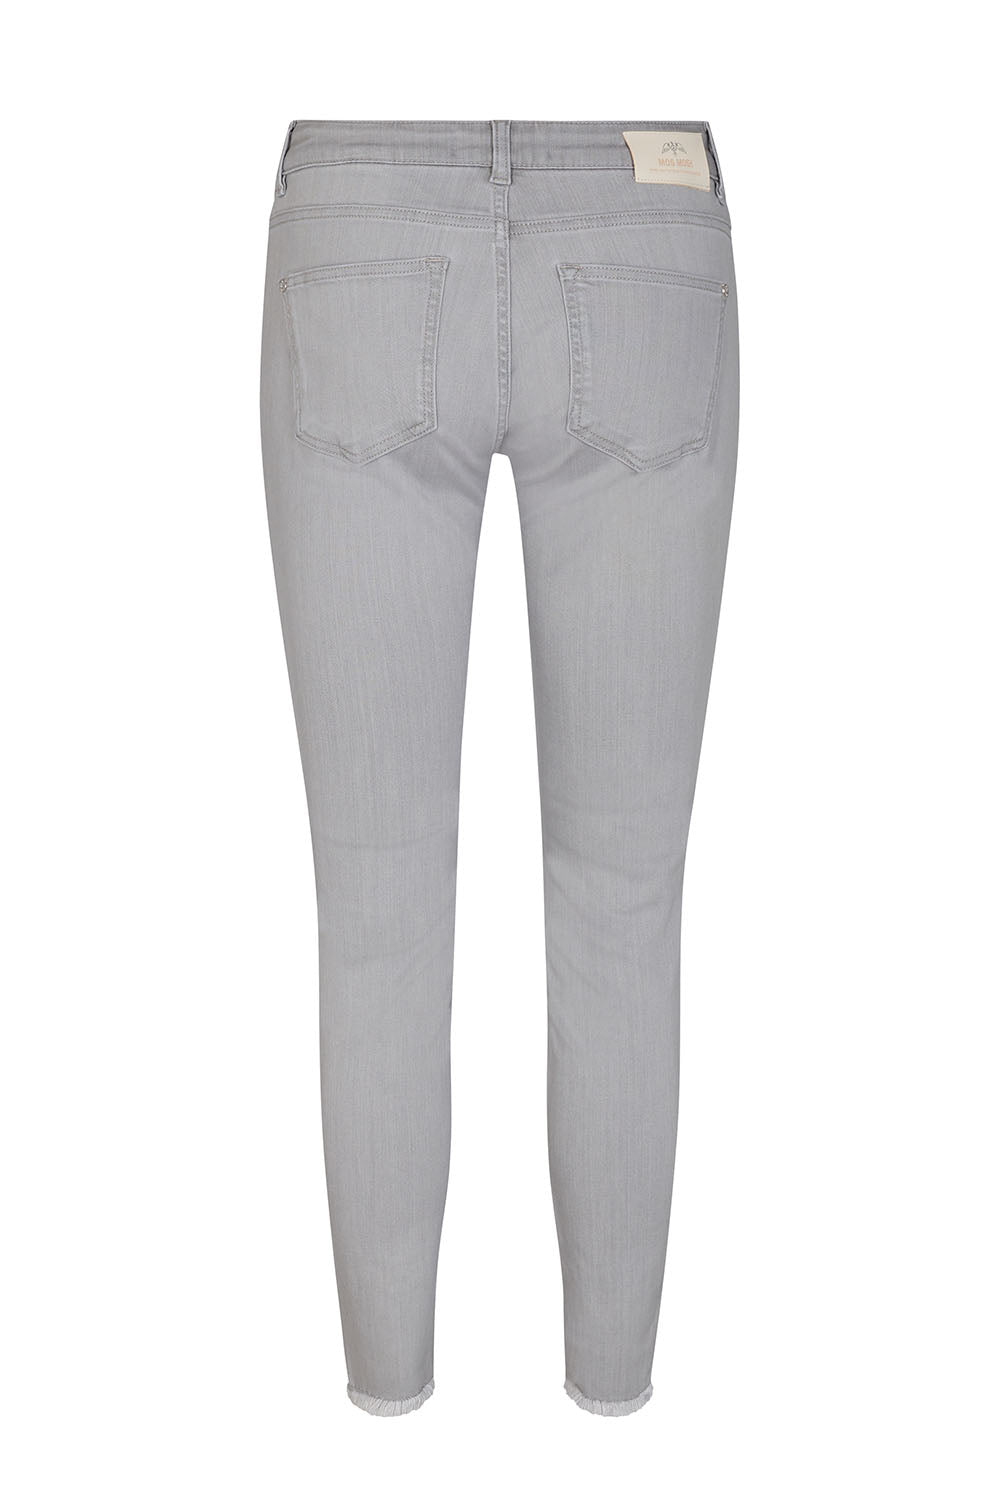 Mos Mosh Summer Silver Jeans Mm140570